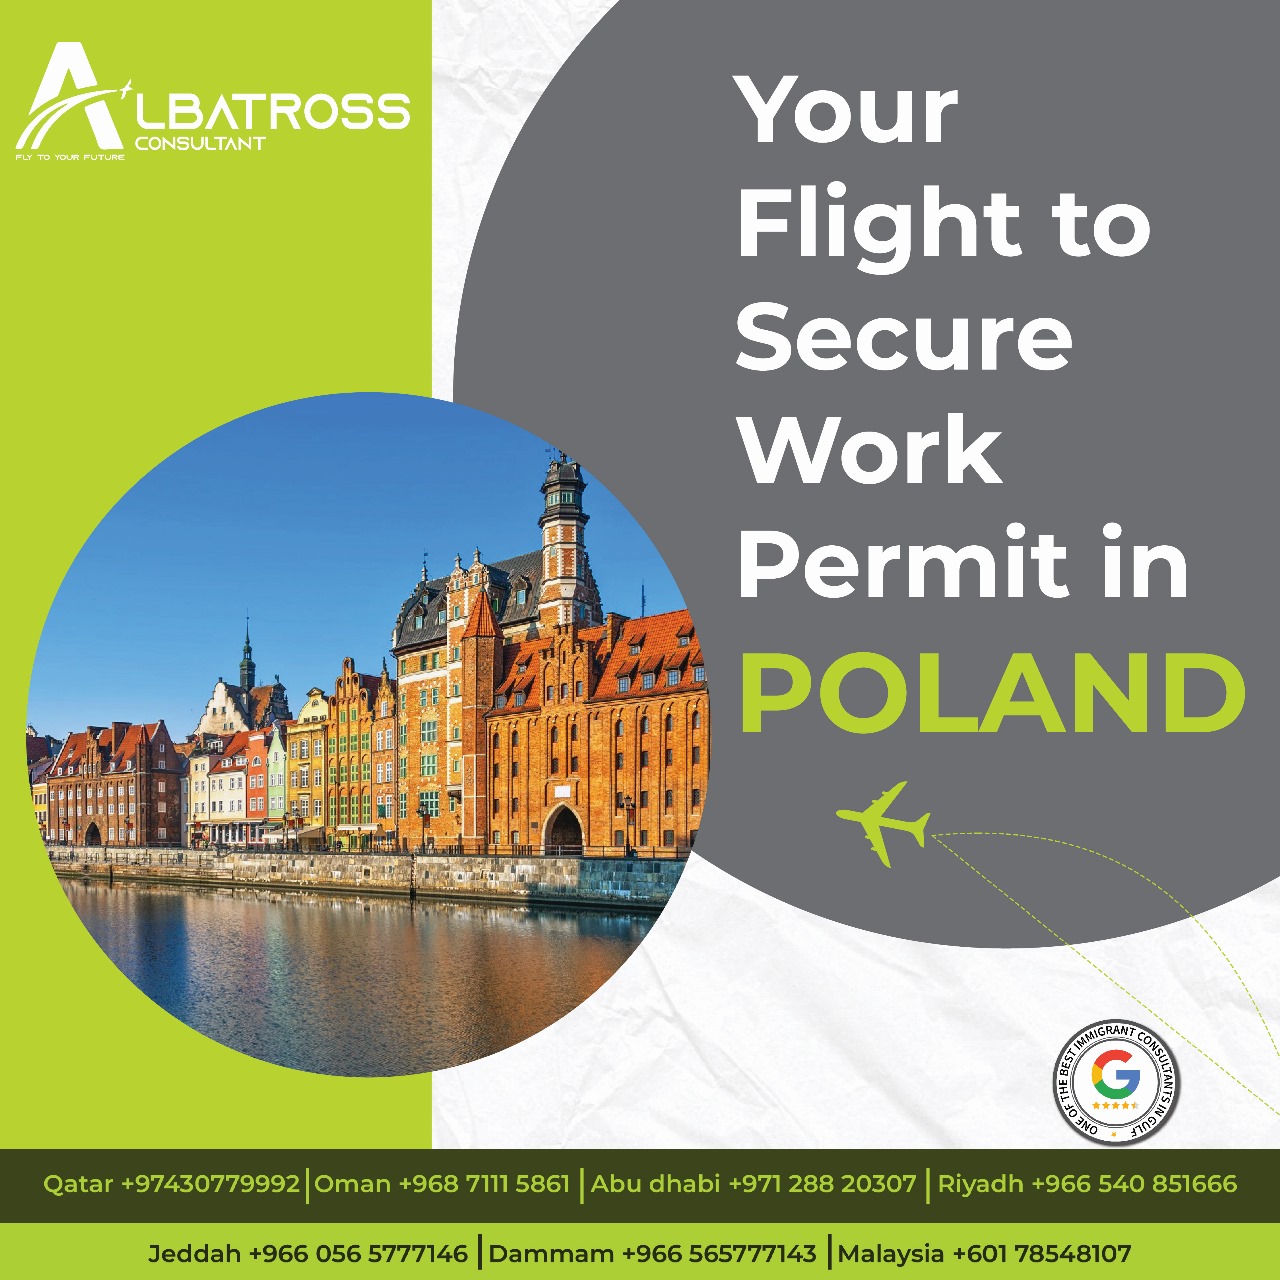 Your Flight to Secure Work Permits in Poland